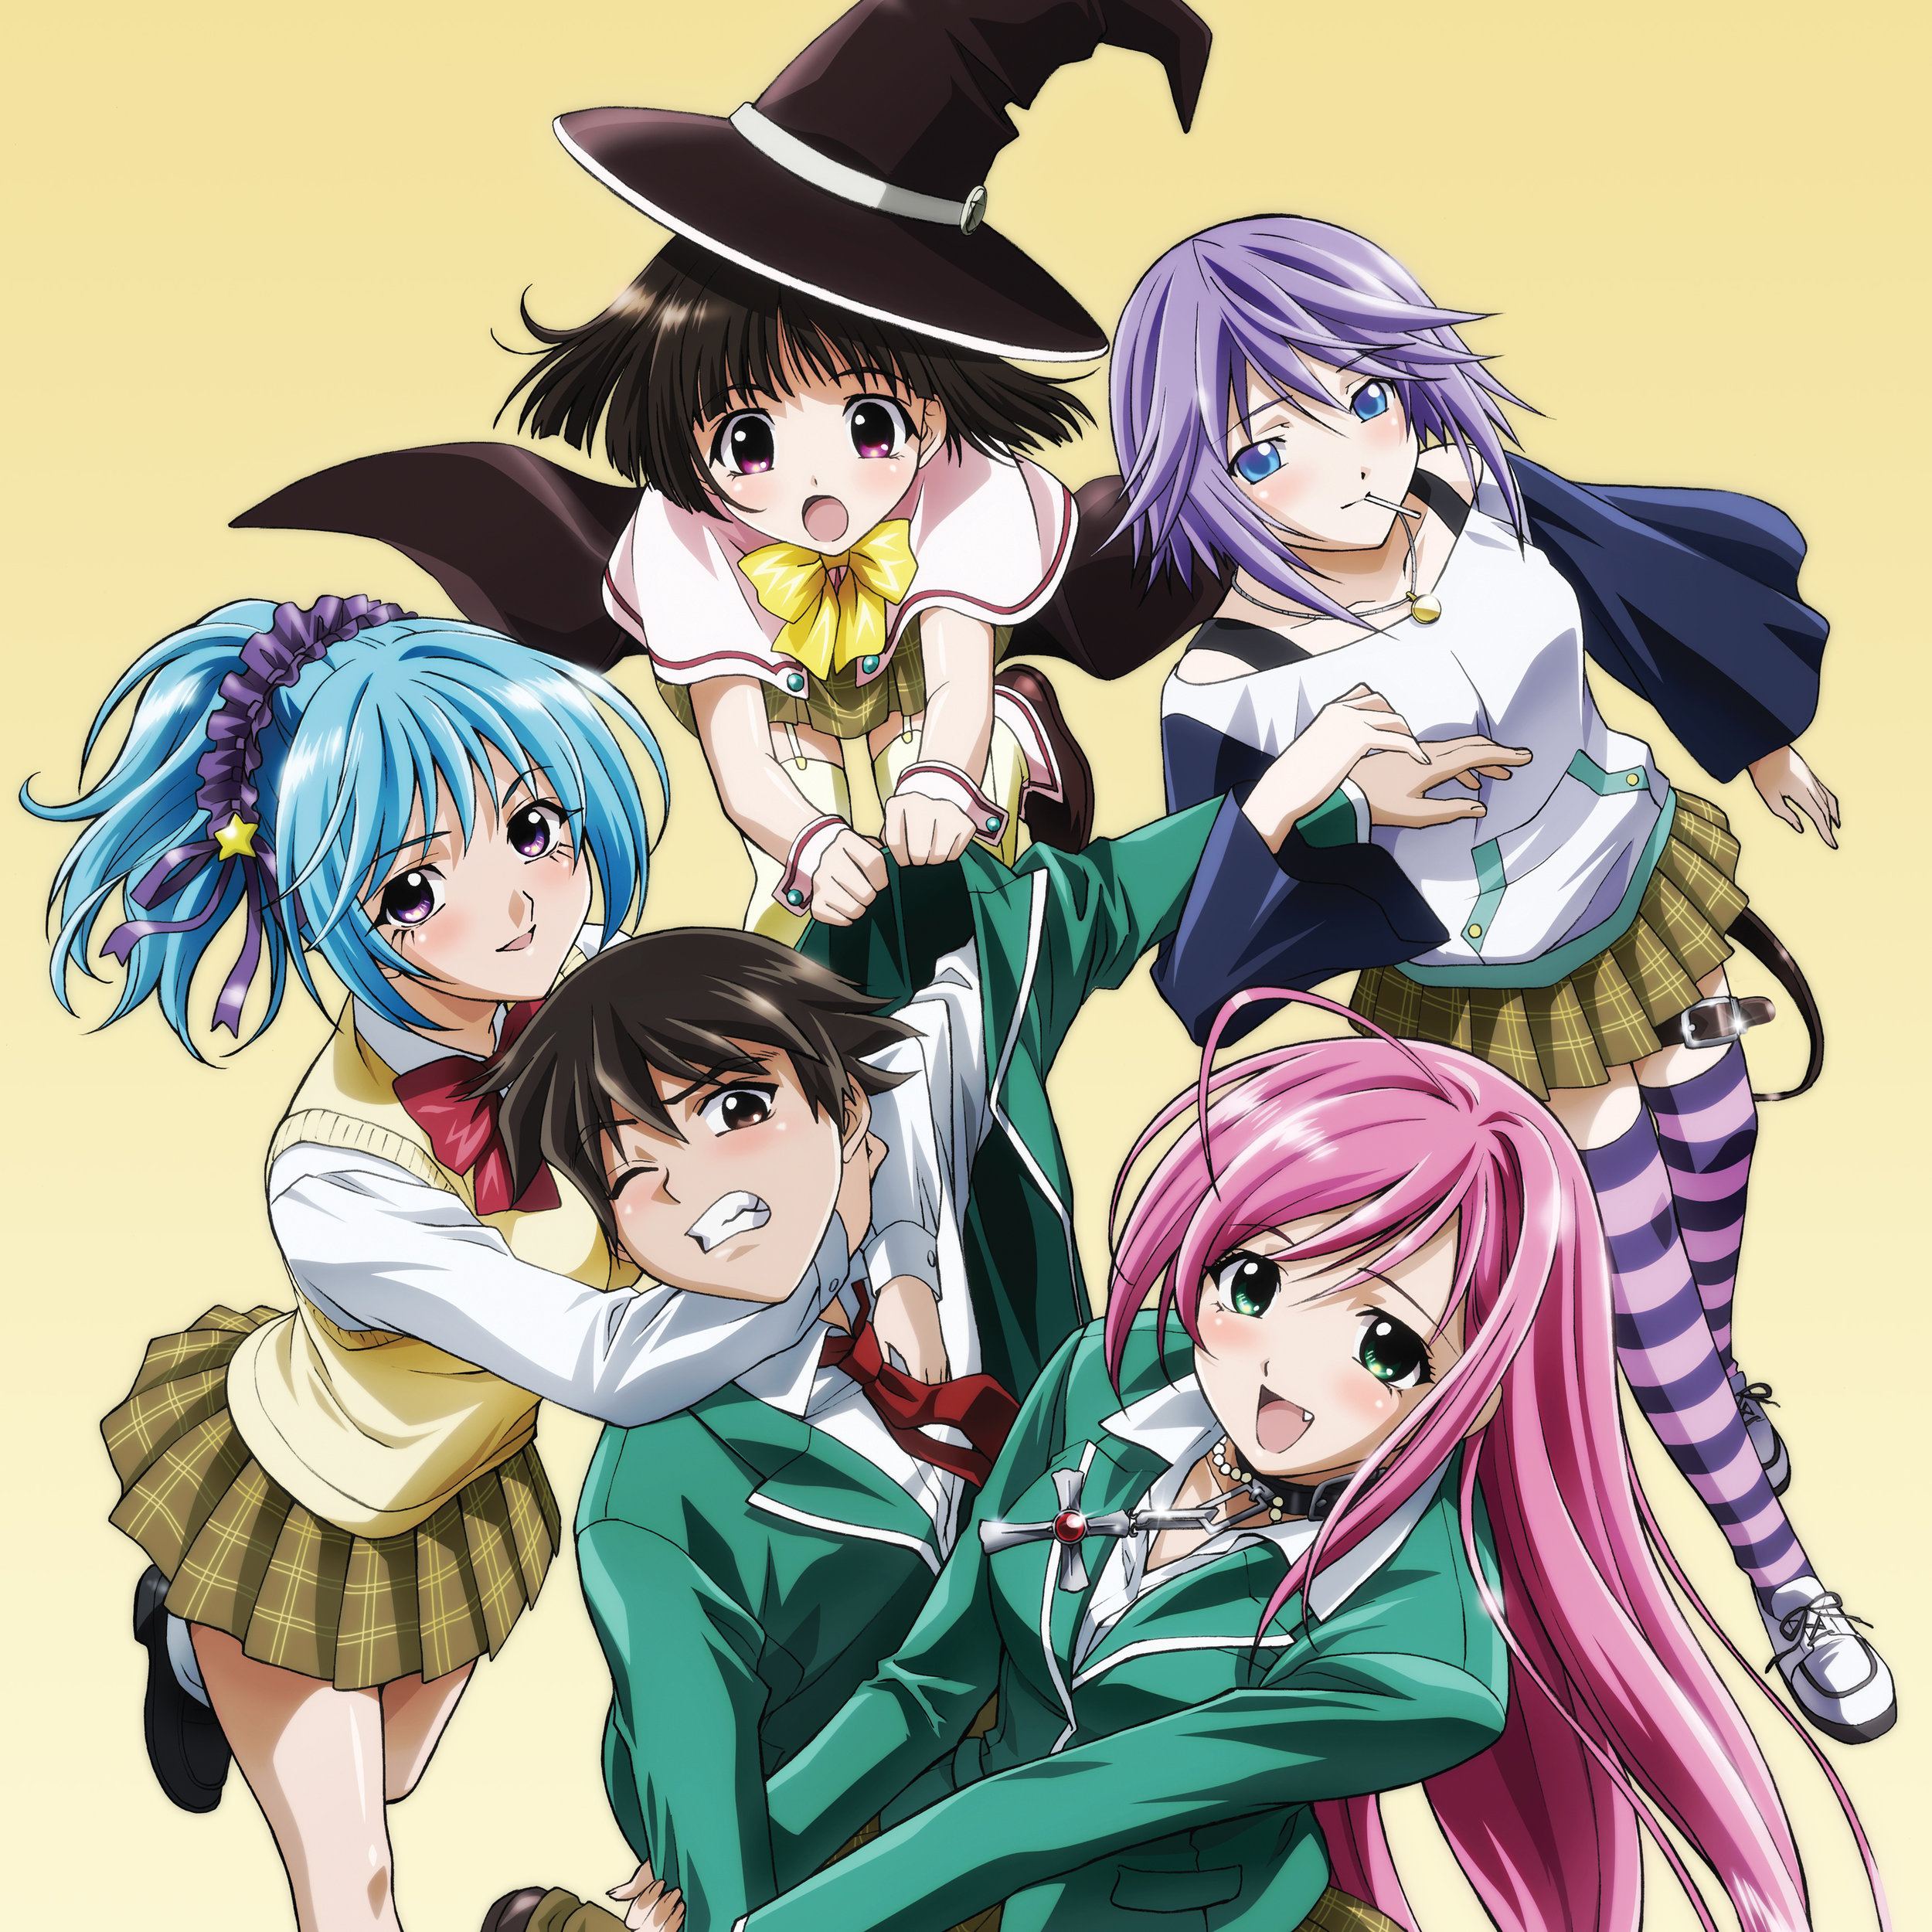 5 Harem Anime That You'll Fall in Love With